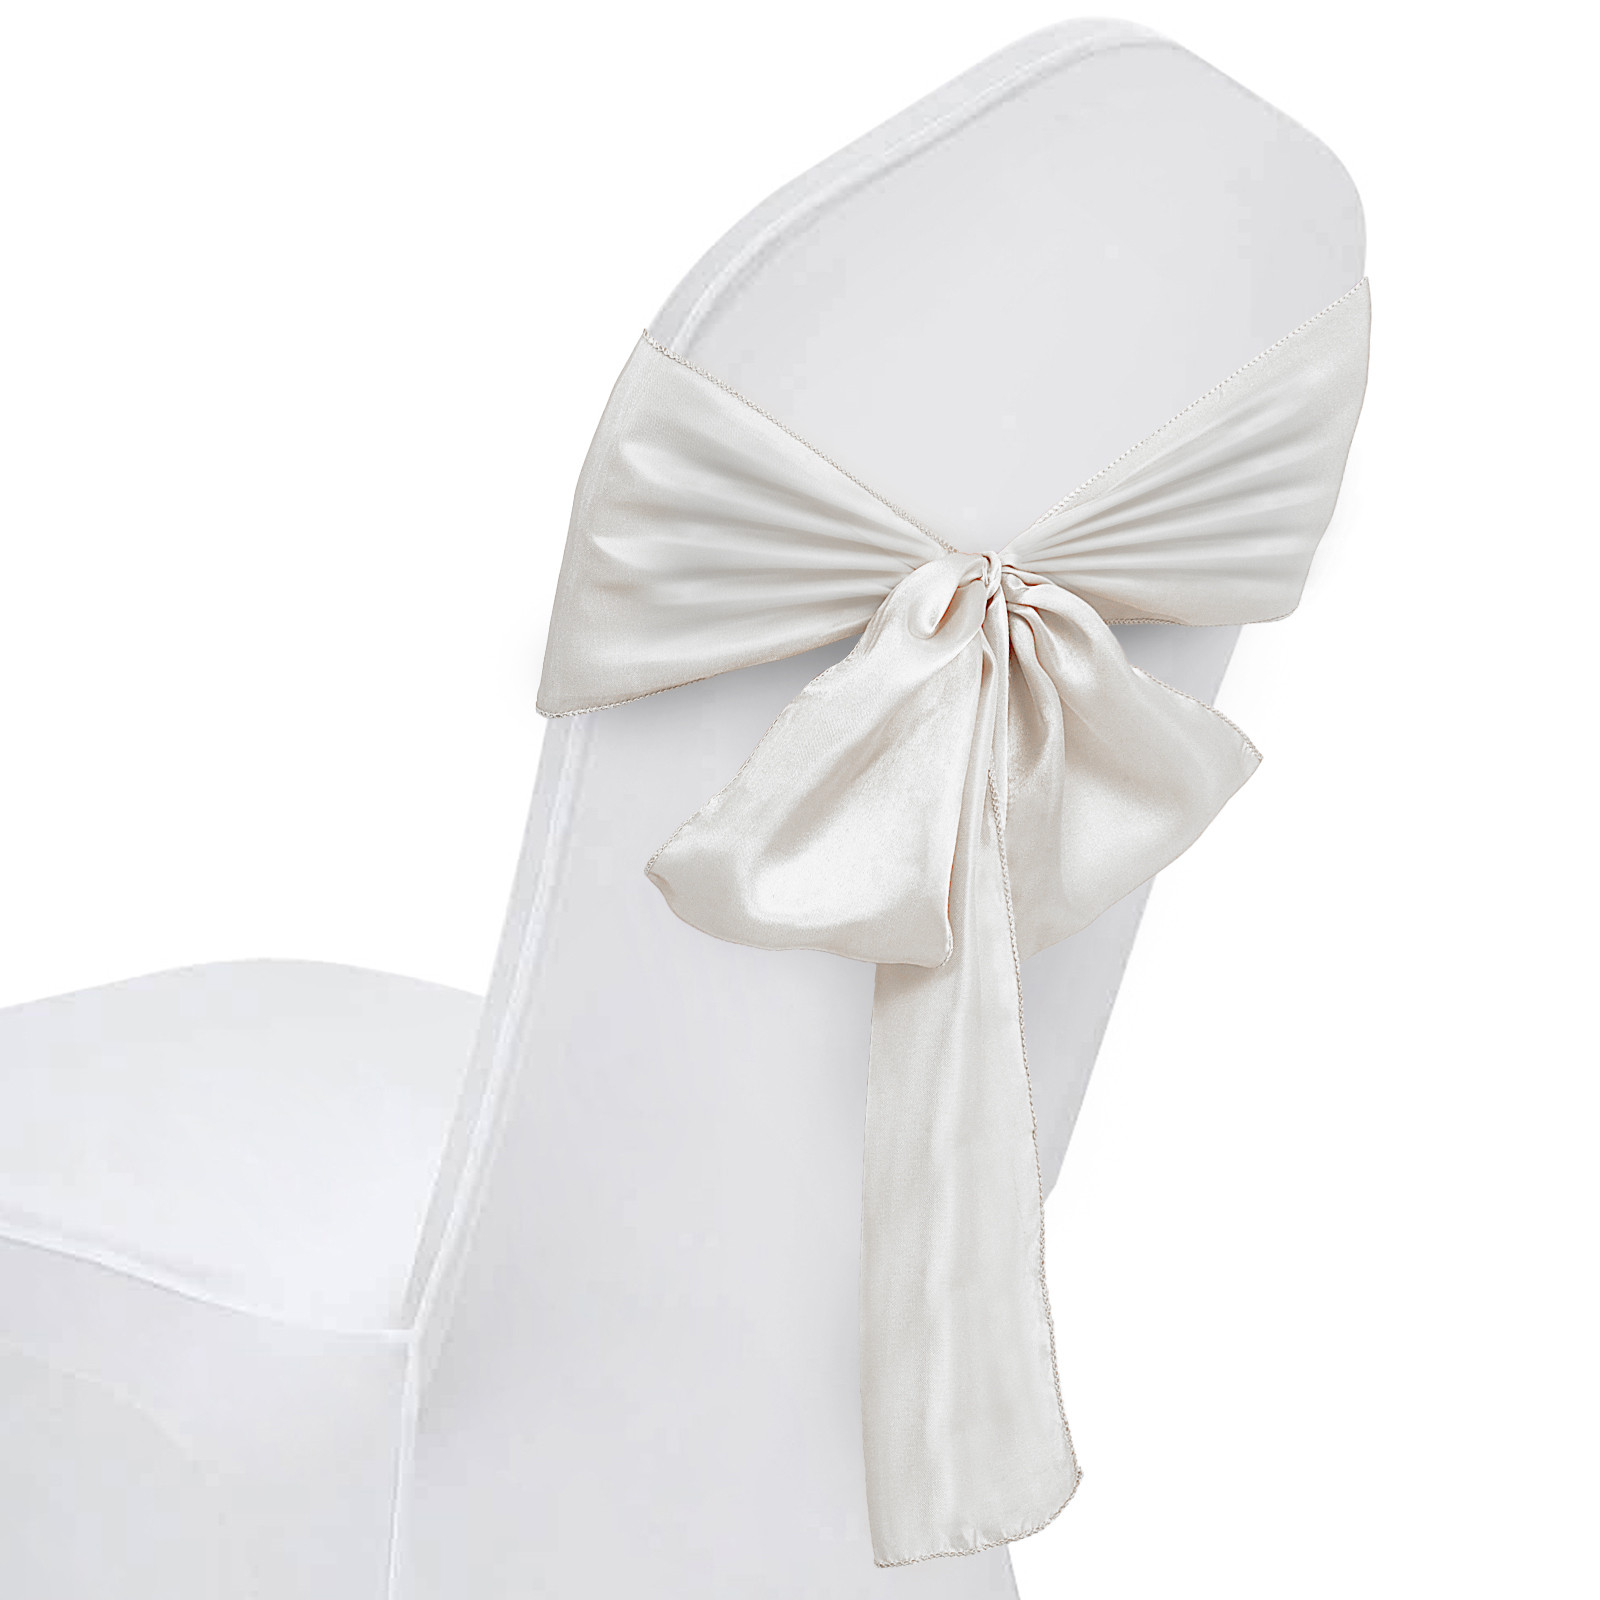 White Chair Cover,50 PCs,Polyester